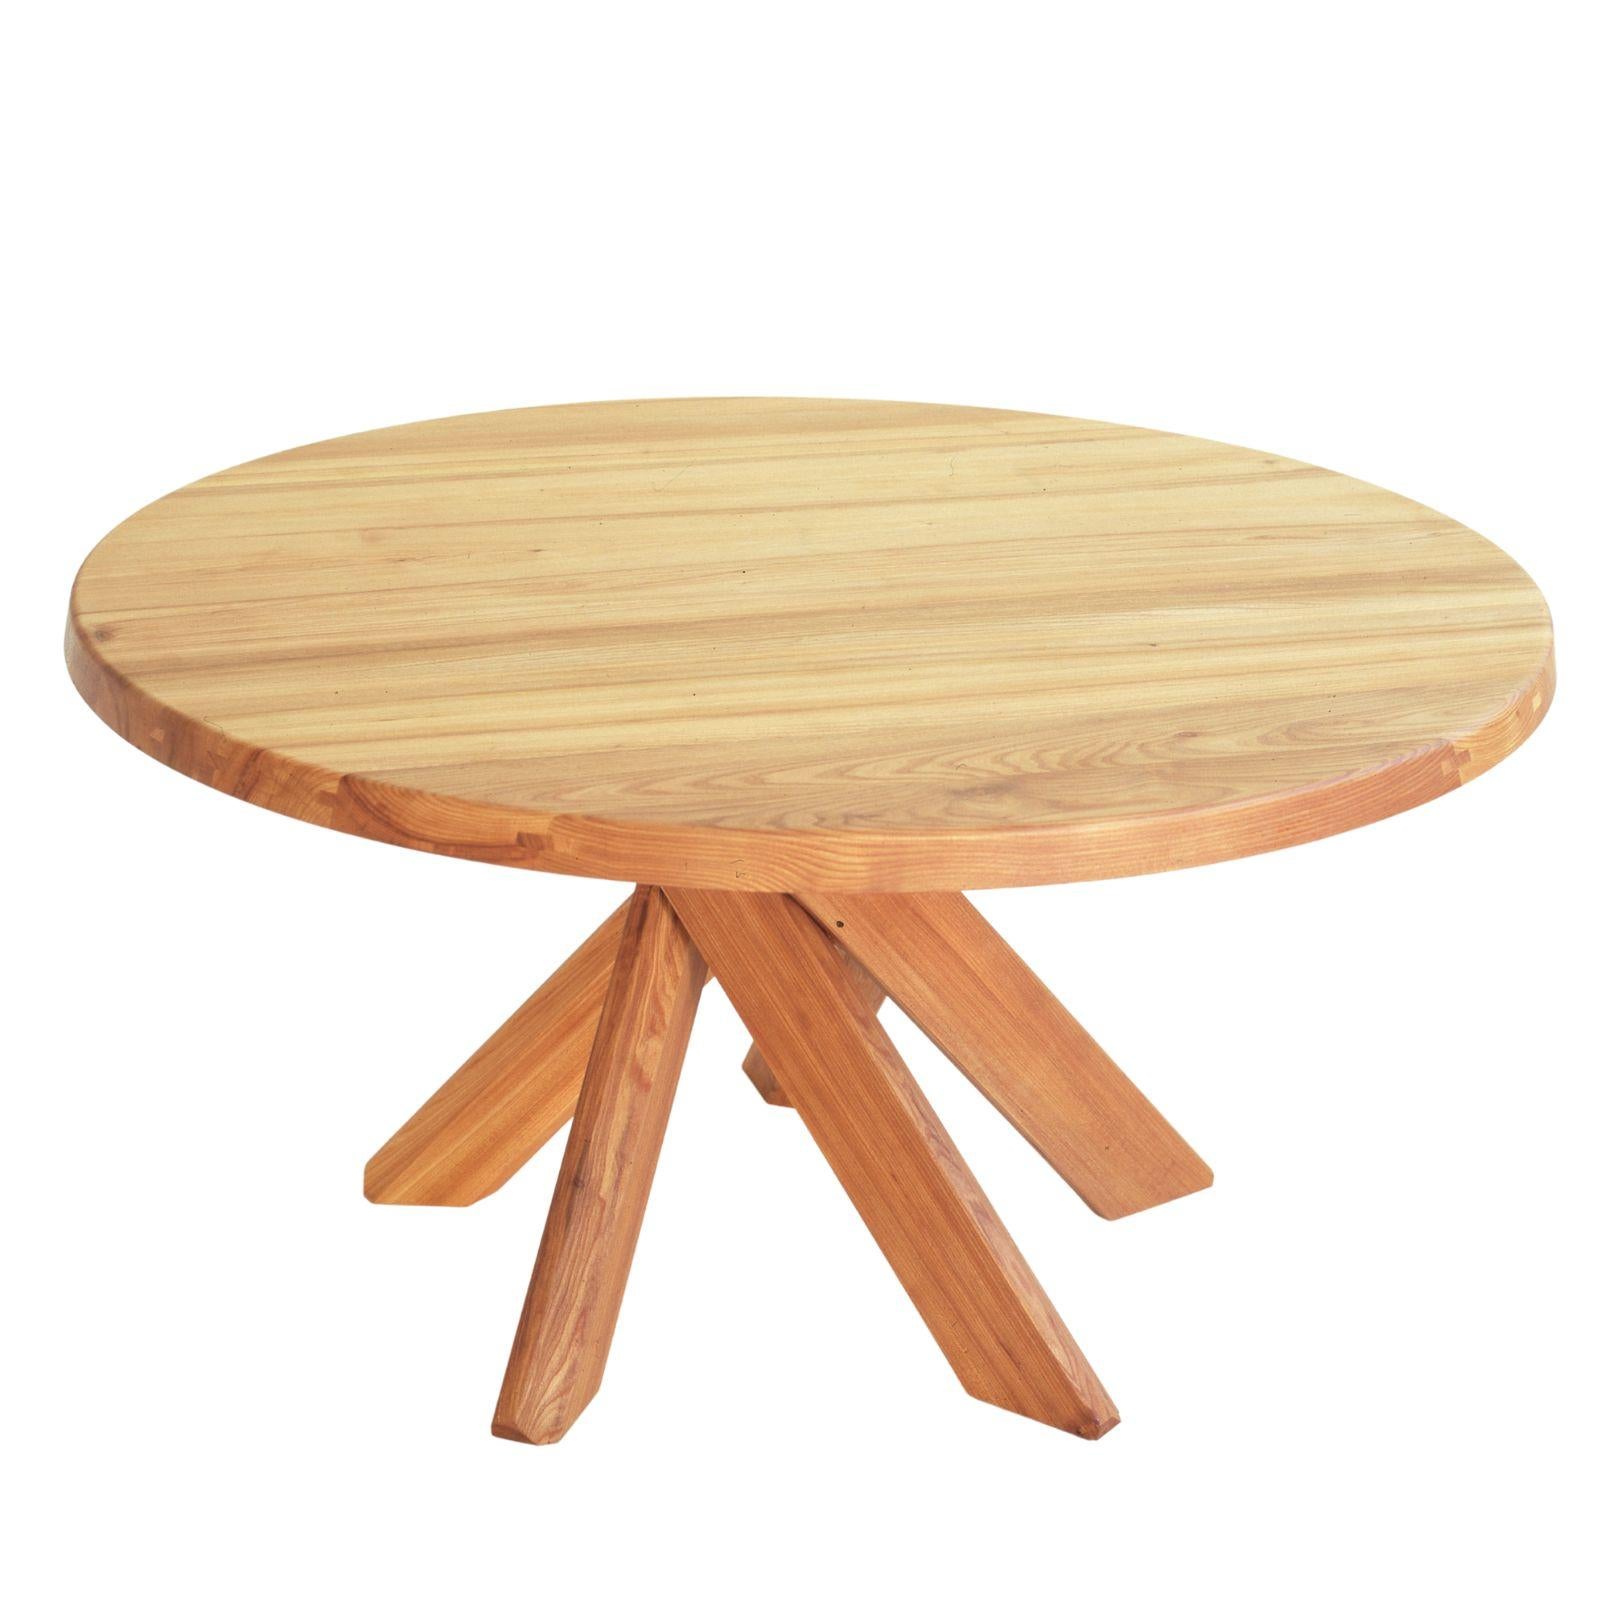 Pierre Chapo 'T21 Sfax' Handcrafted Solid Oak Wood Table for Chapo Création For Sale 2